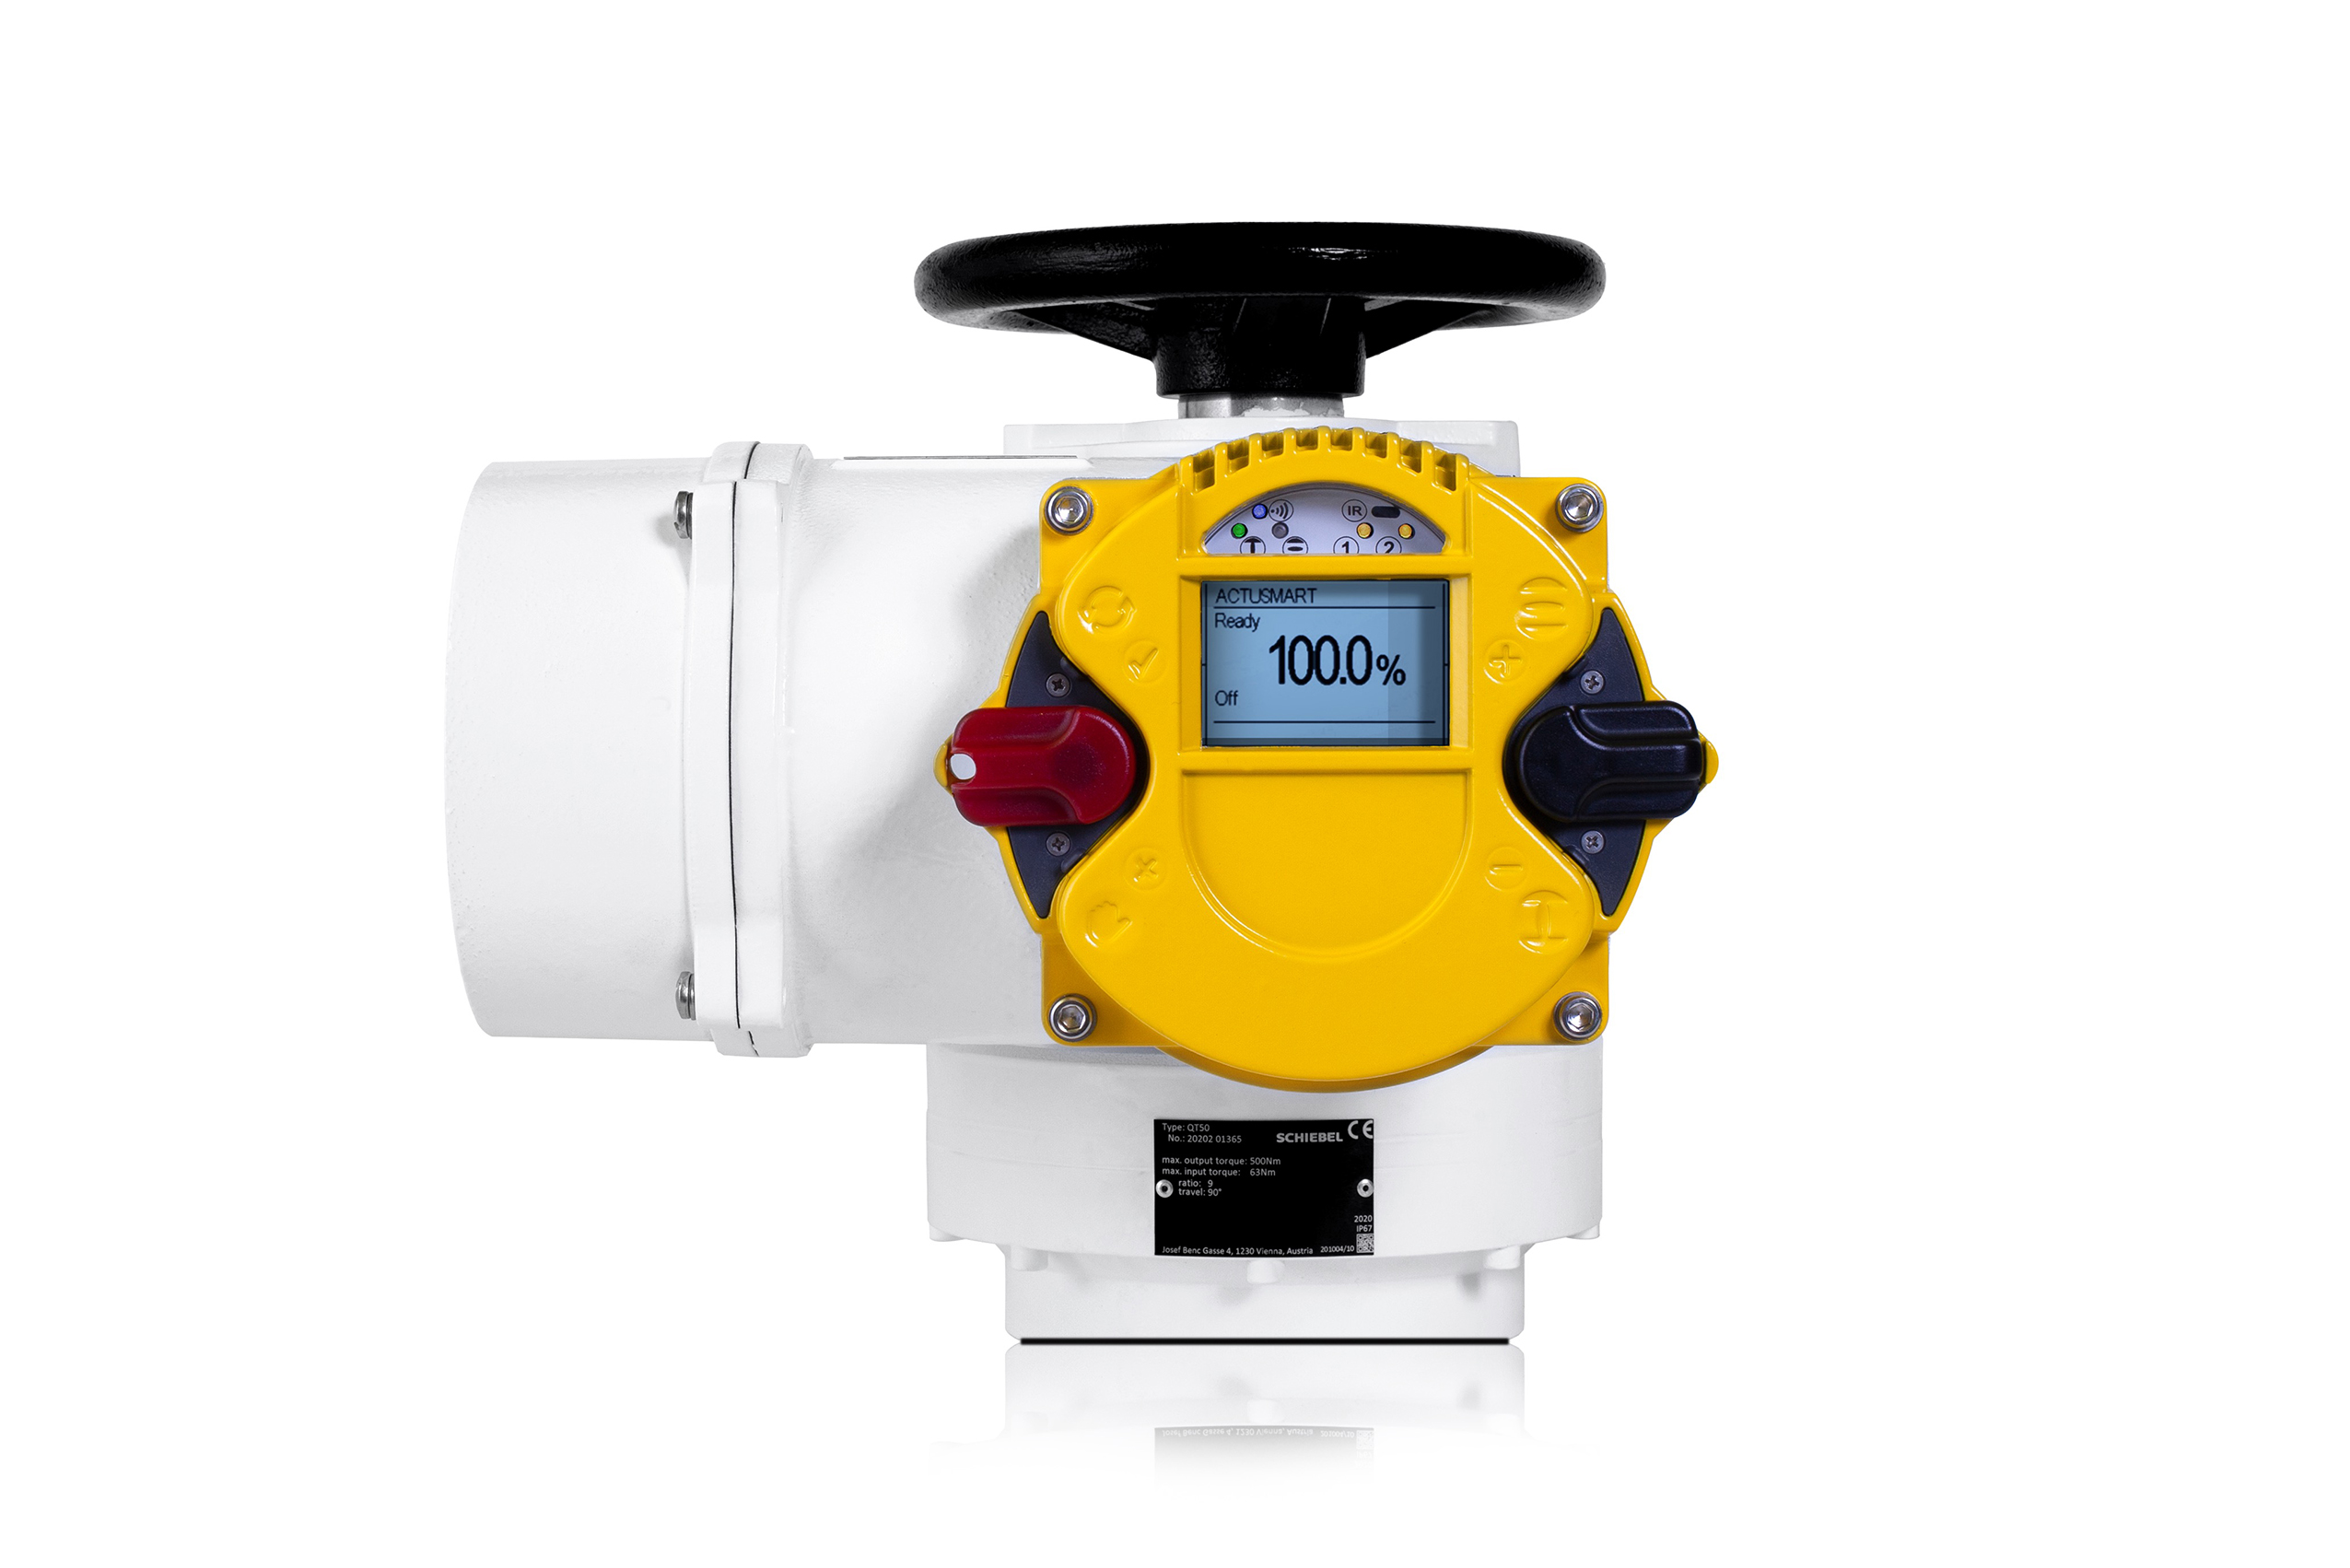 An industrial actuator painted in white with a yellow control unit facing the camera. The background is plain white. 